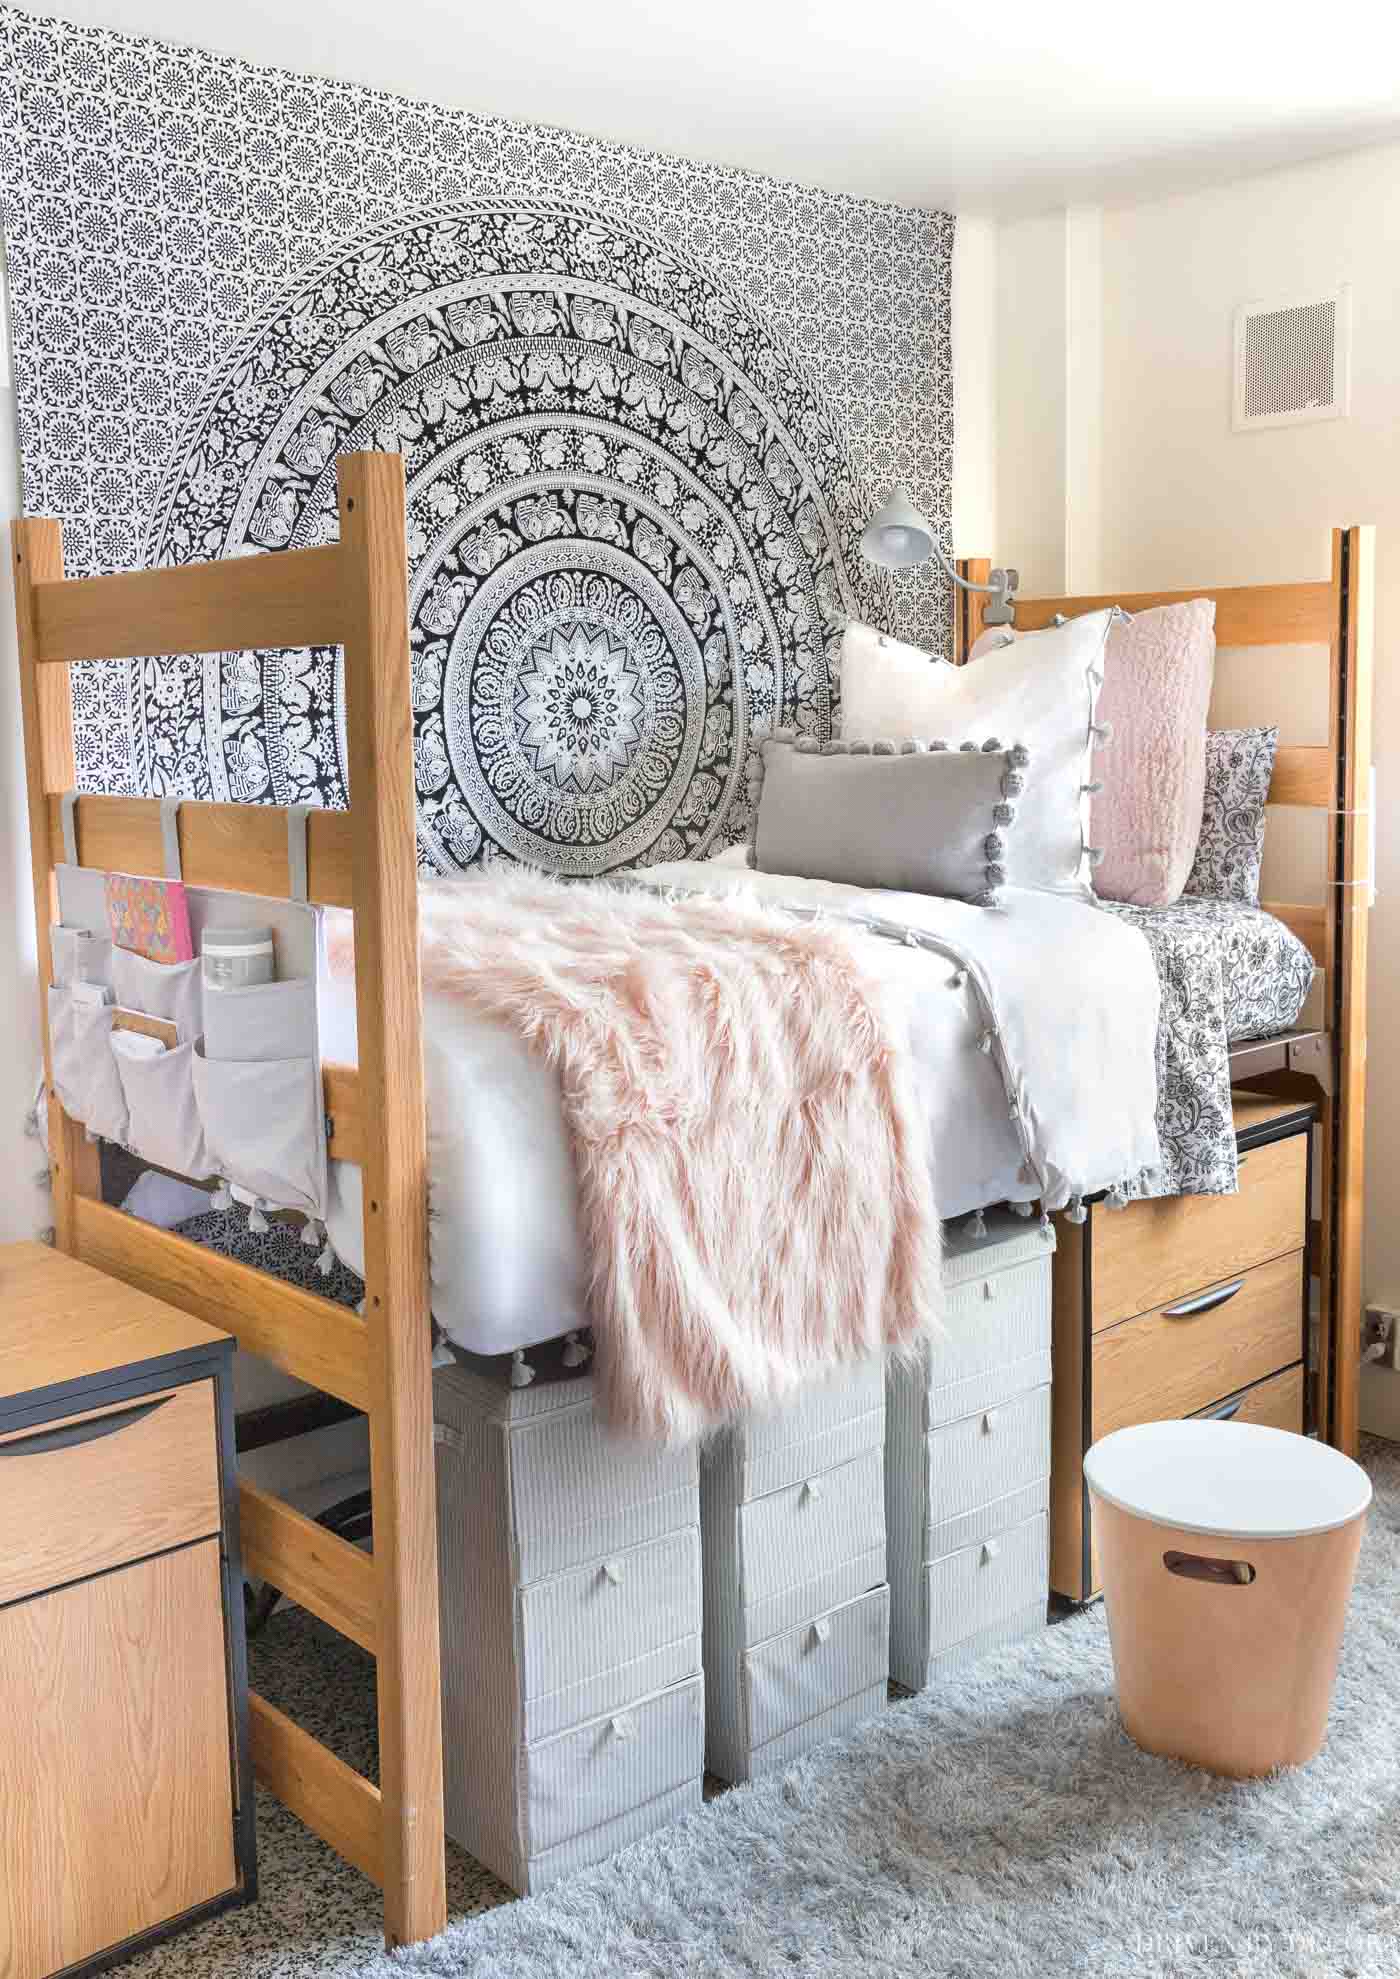 Dorm Room Ideas For Girls From Our Before After Dorm Room Makeover Driven By Decor